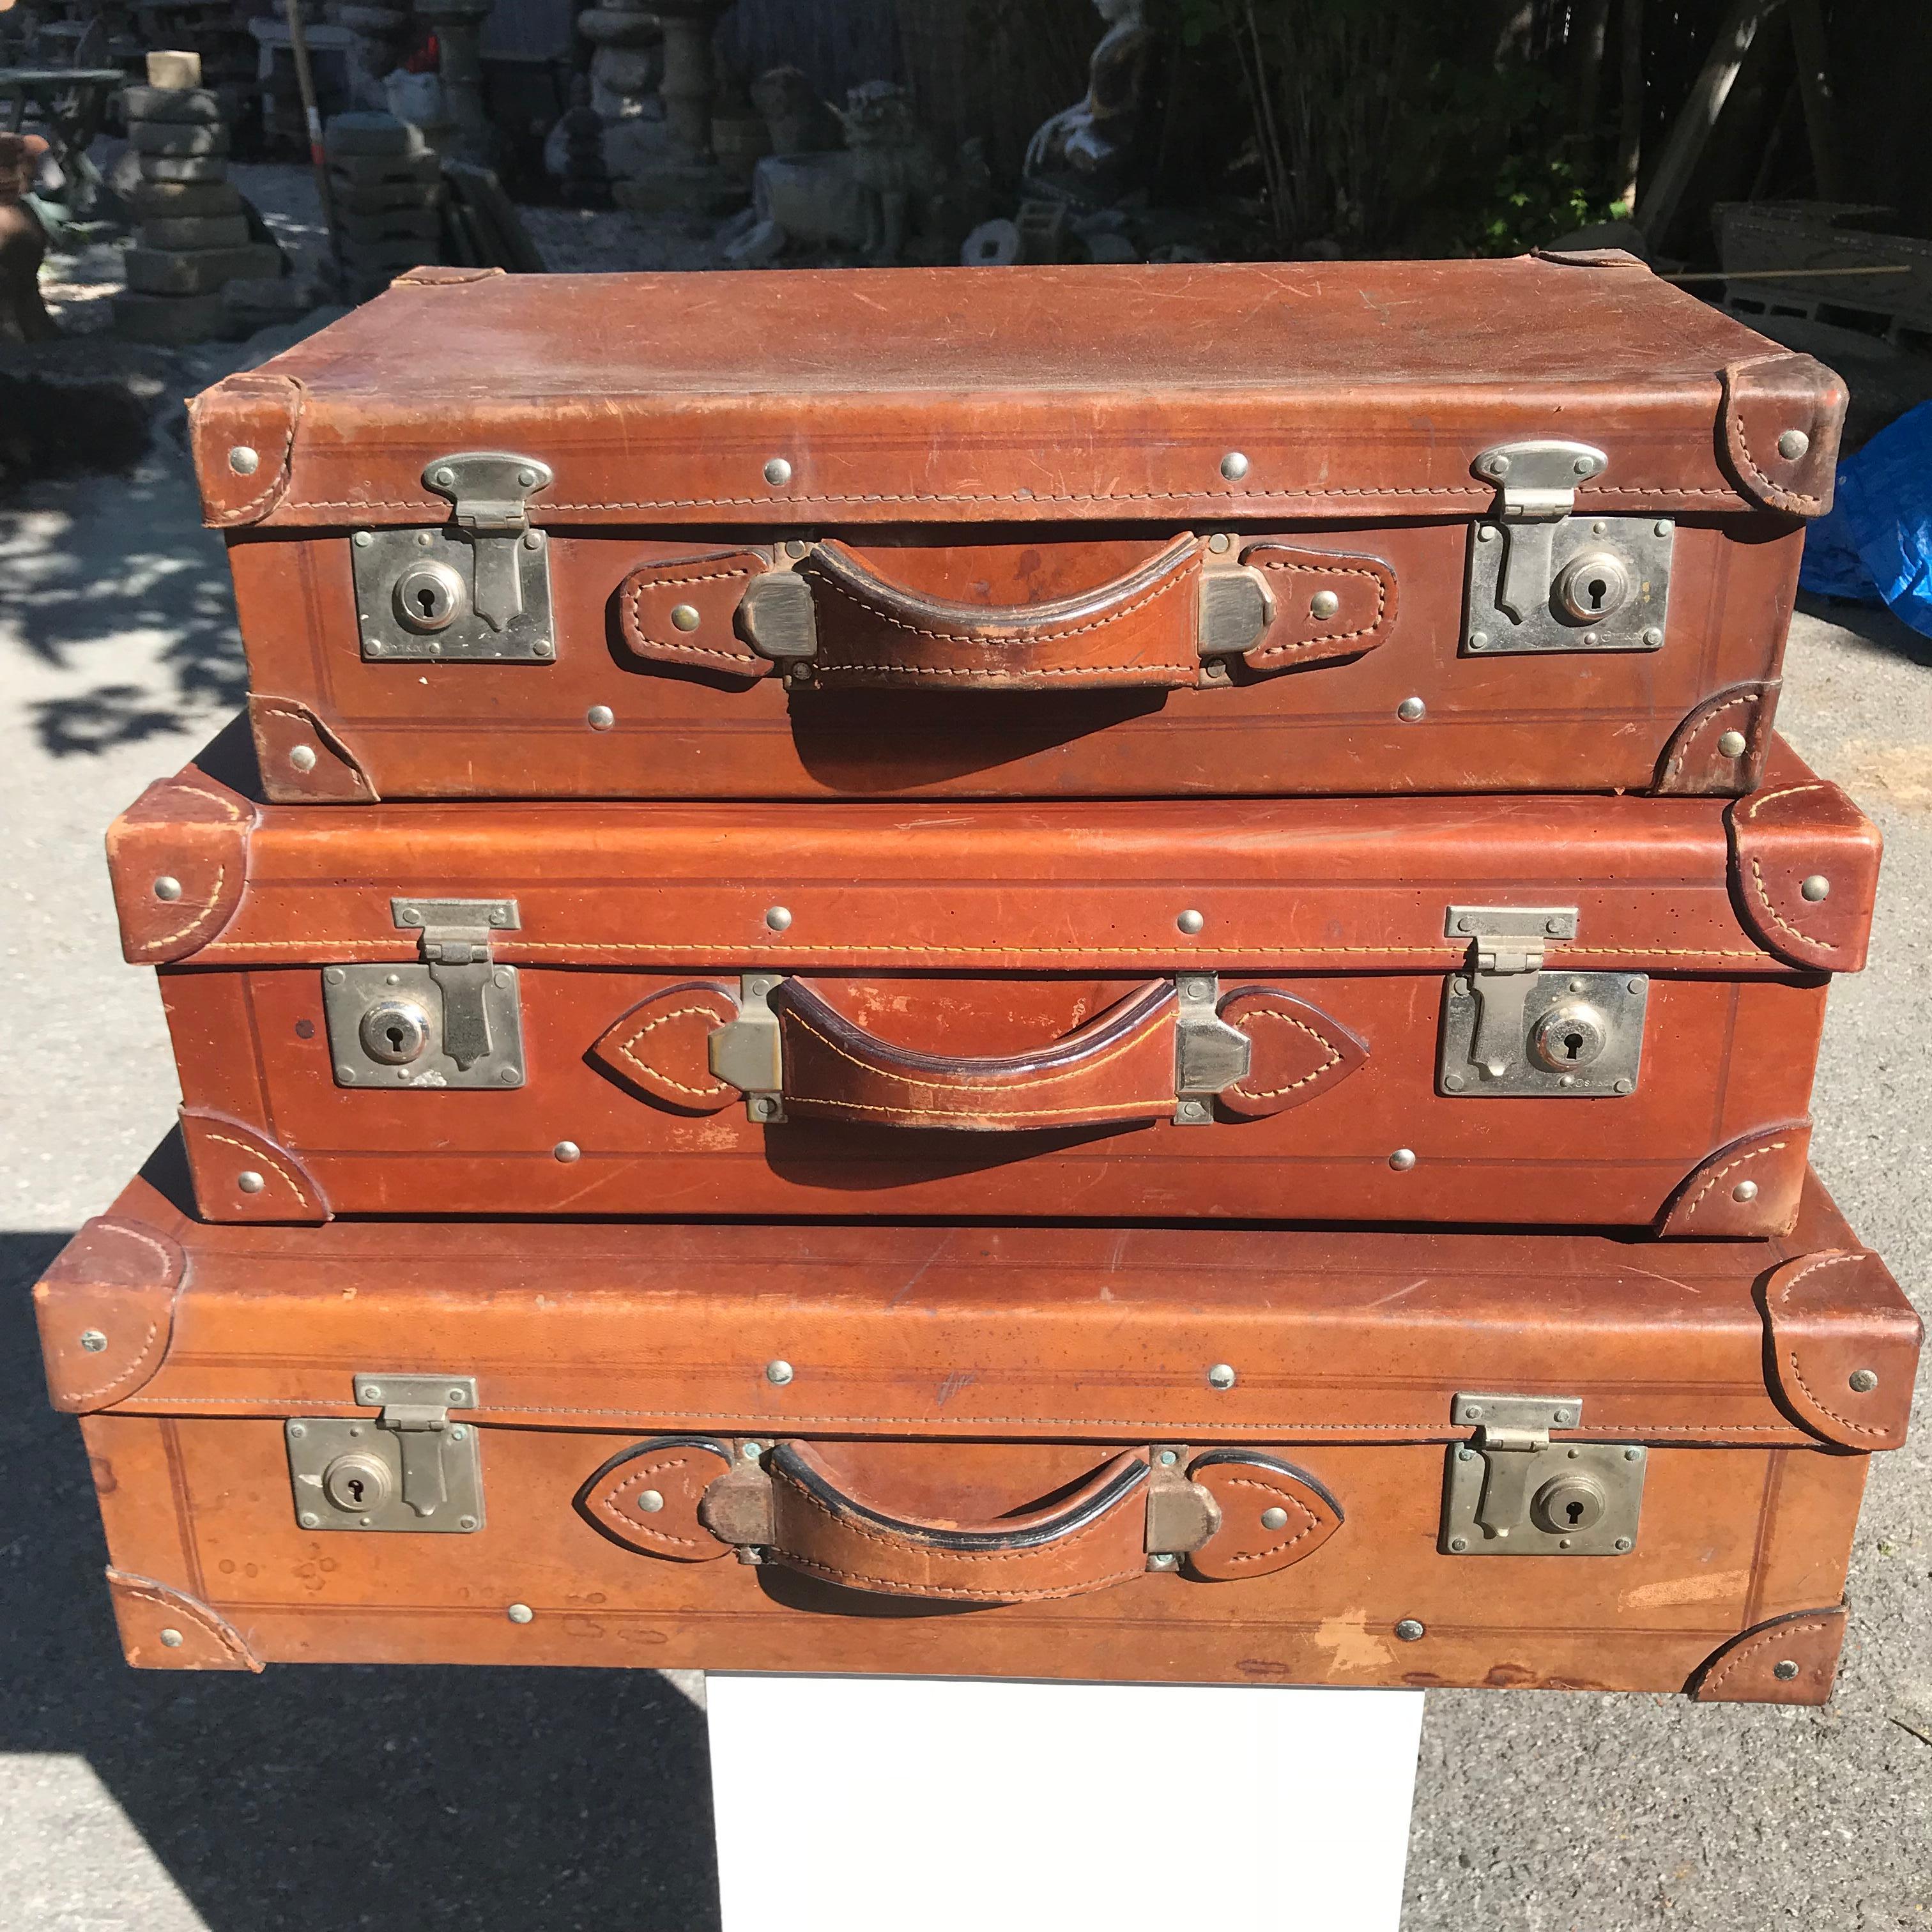 From our recent Japanese Acquisition travels & From a Private Japanese collection

Unusual set of Japanese antique leather Luggage Trio, signed and from the 1920s period.

This is a fine group of these elusive and collectible leather suit cases